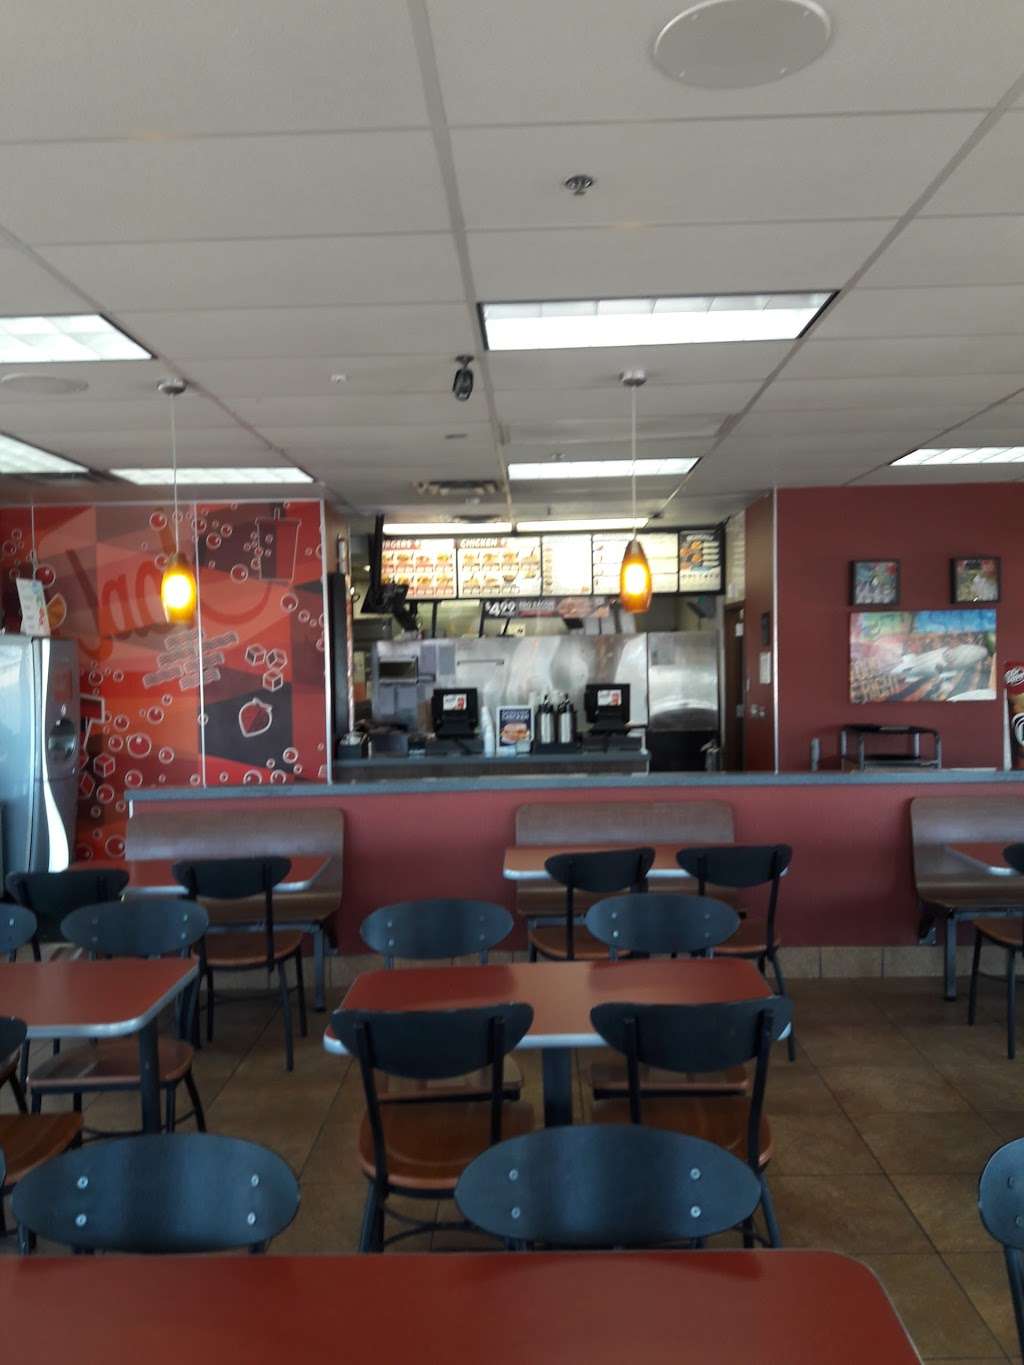 Jack in the Box | 11101 Grand Ave, Youngtown, AZ 85363, USA | Phone: (623) 523-0211